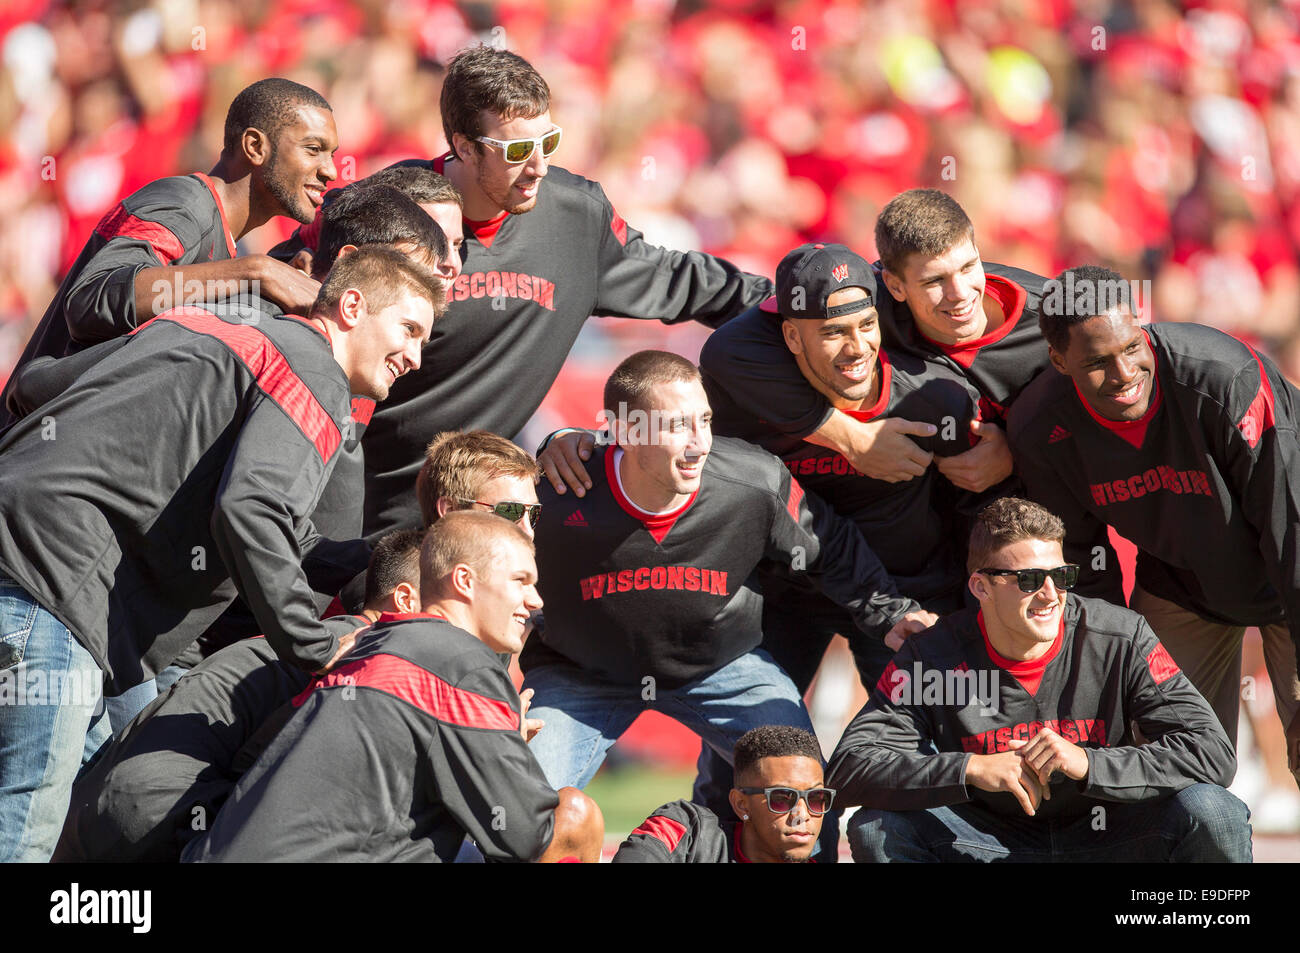 October 25, 2014: The Wisconsin Mens Basketball team is honored during the NCAA Football game between the Maryland Terrapins and the Wisconsin Badgers at Camp Randall Stadium in Madison, WI. Wisconsin defeated Maryland 52-7. John Fisher/CSM Stock Photo